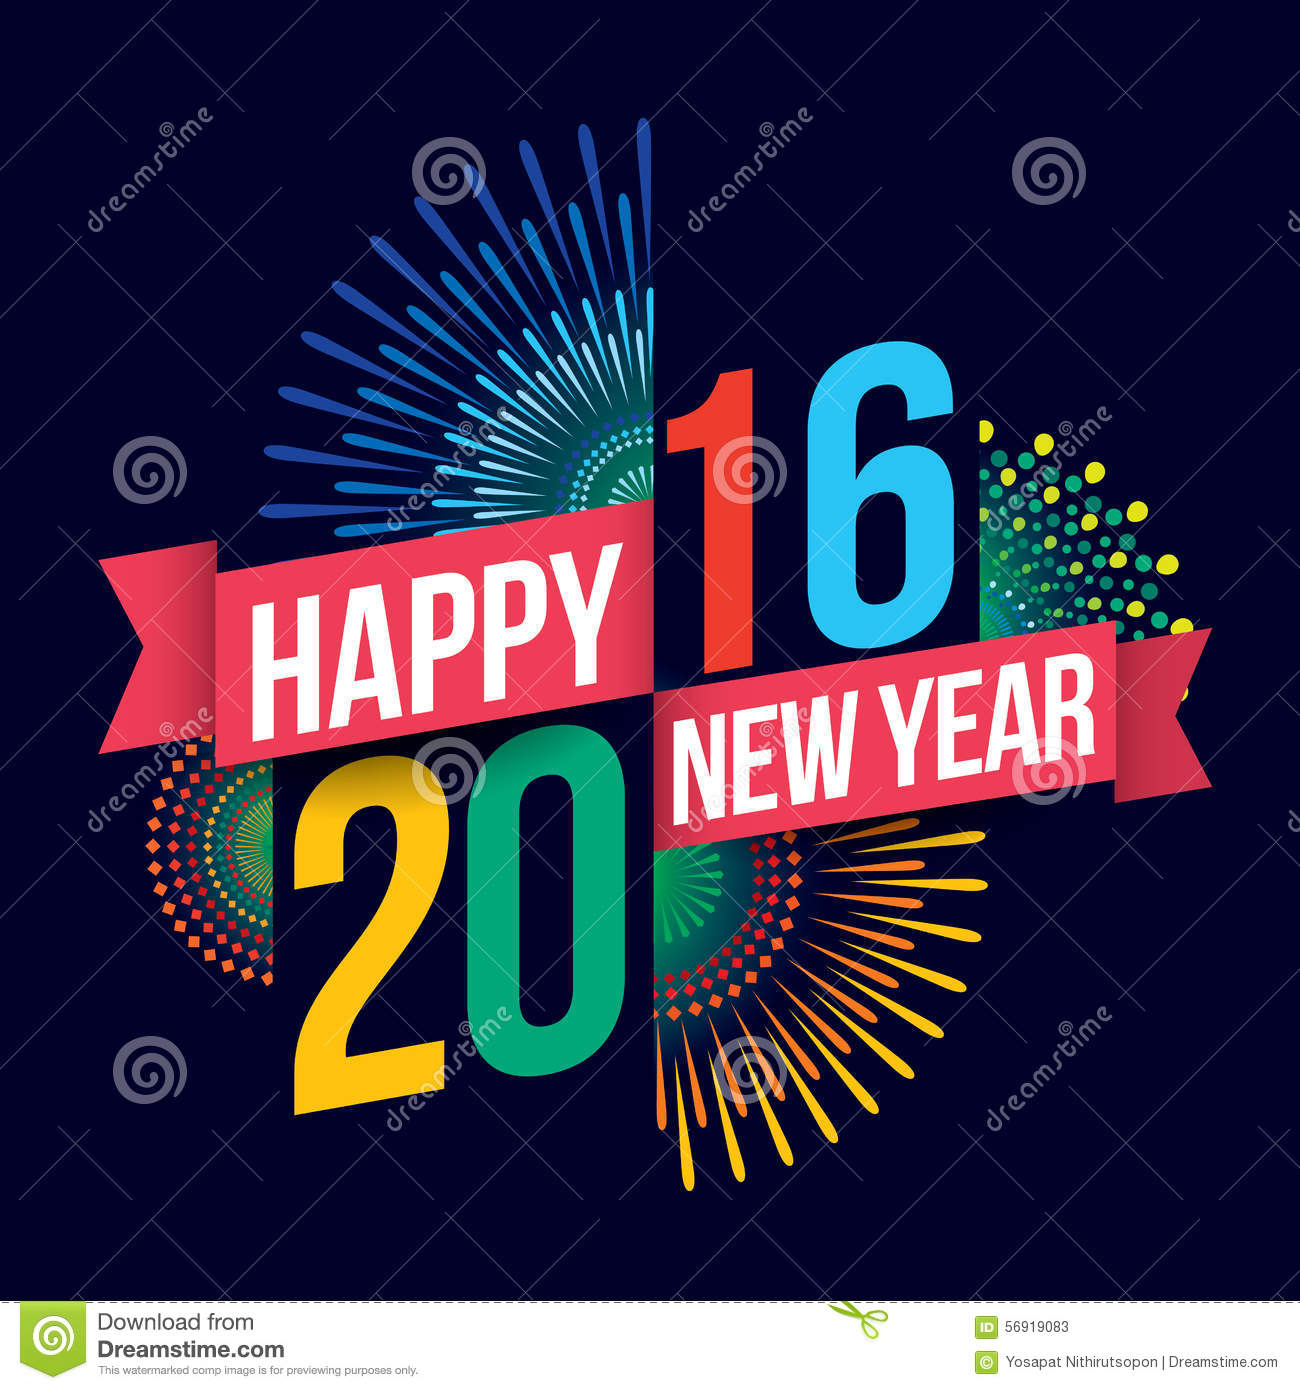 Happy New Year 2016 Greetings Picture For Facebook